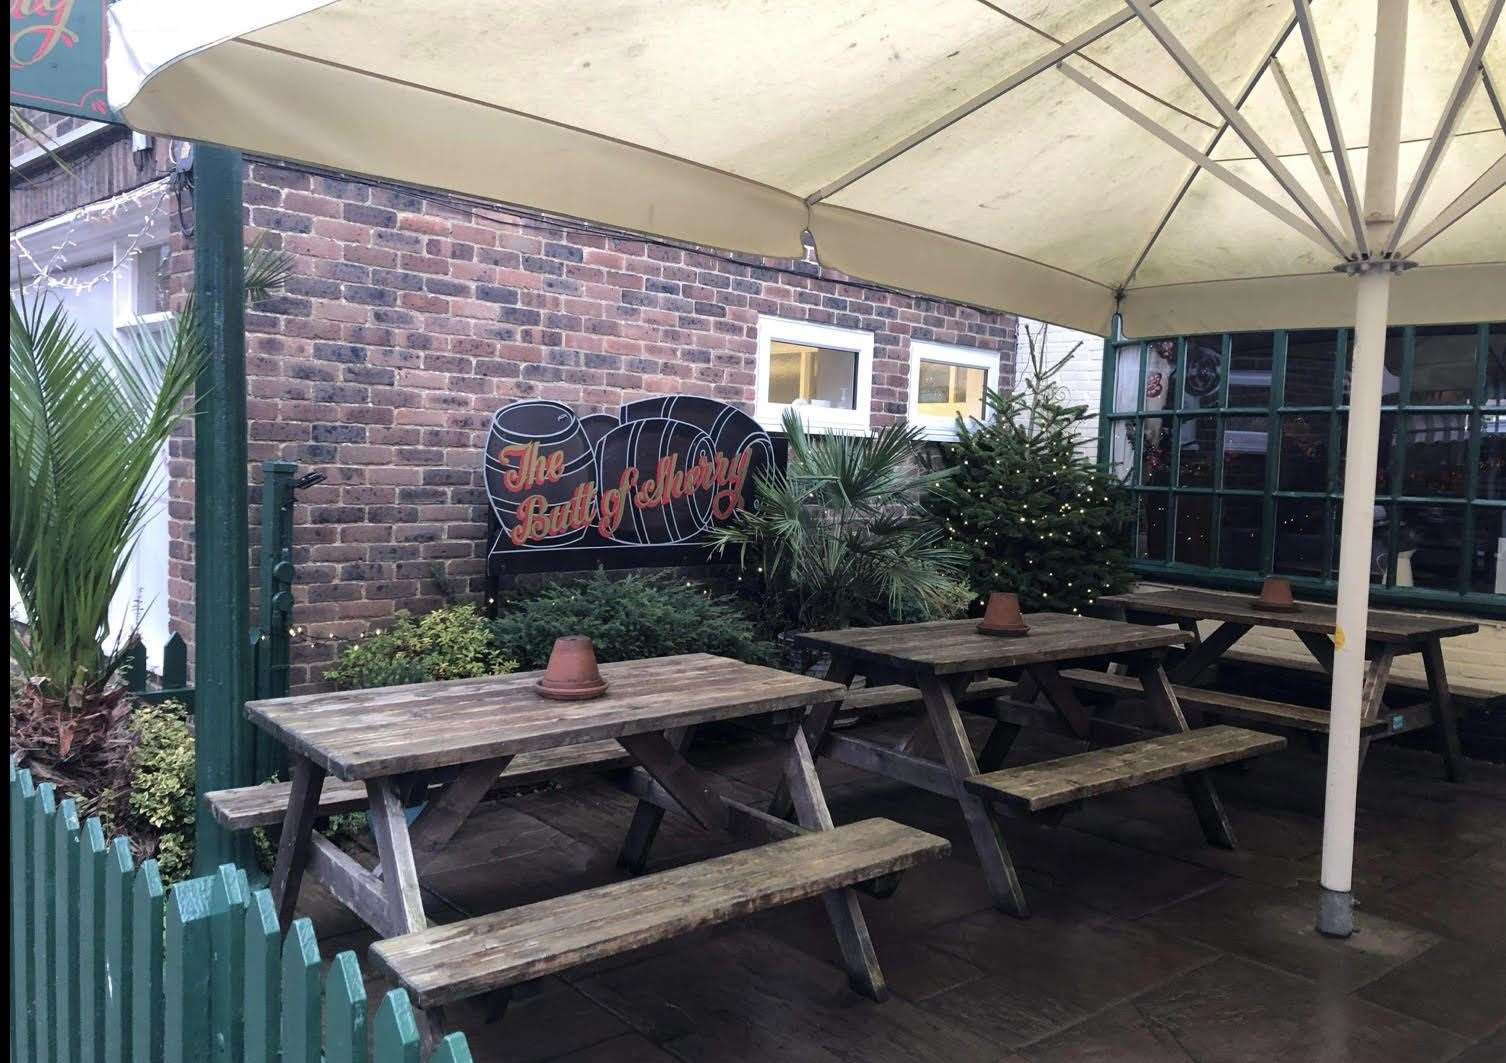 The outside seating area